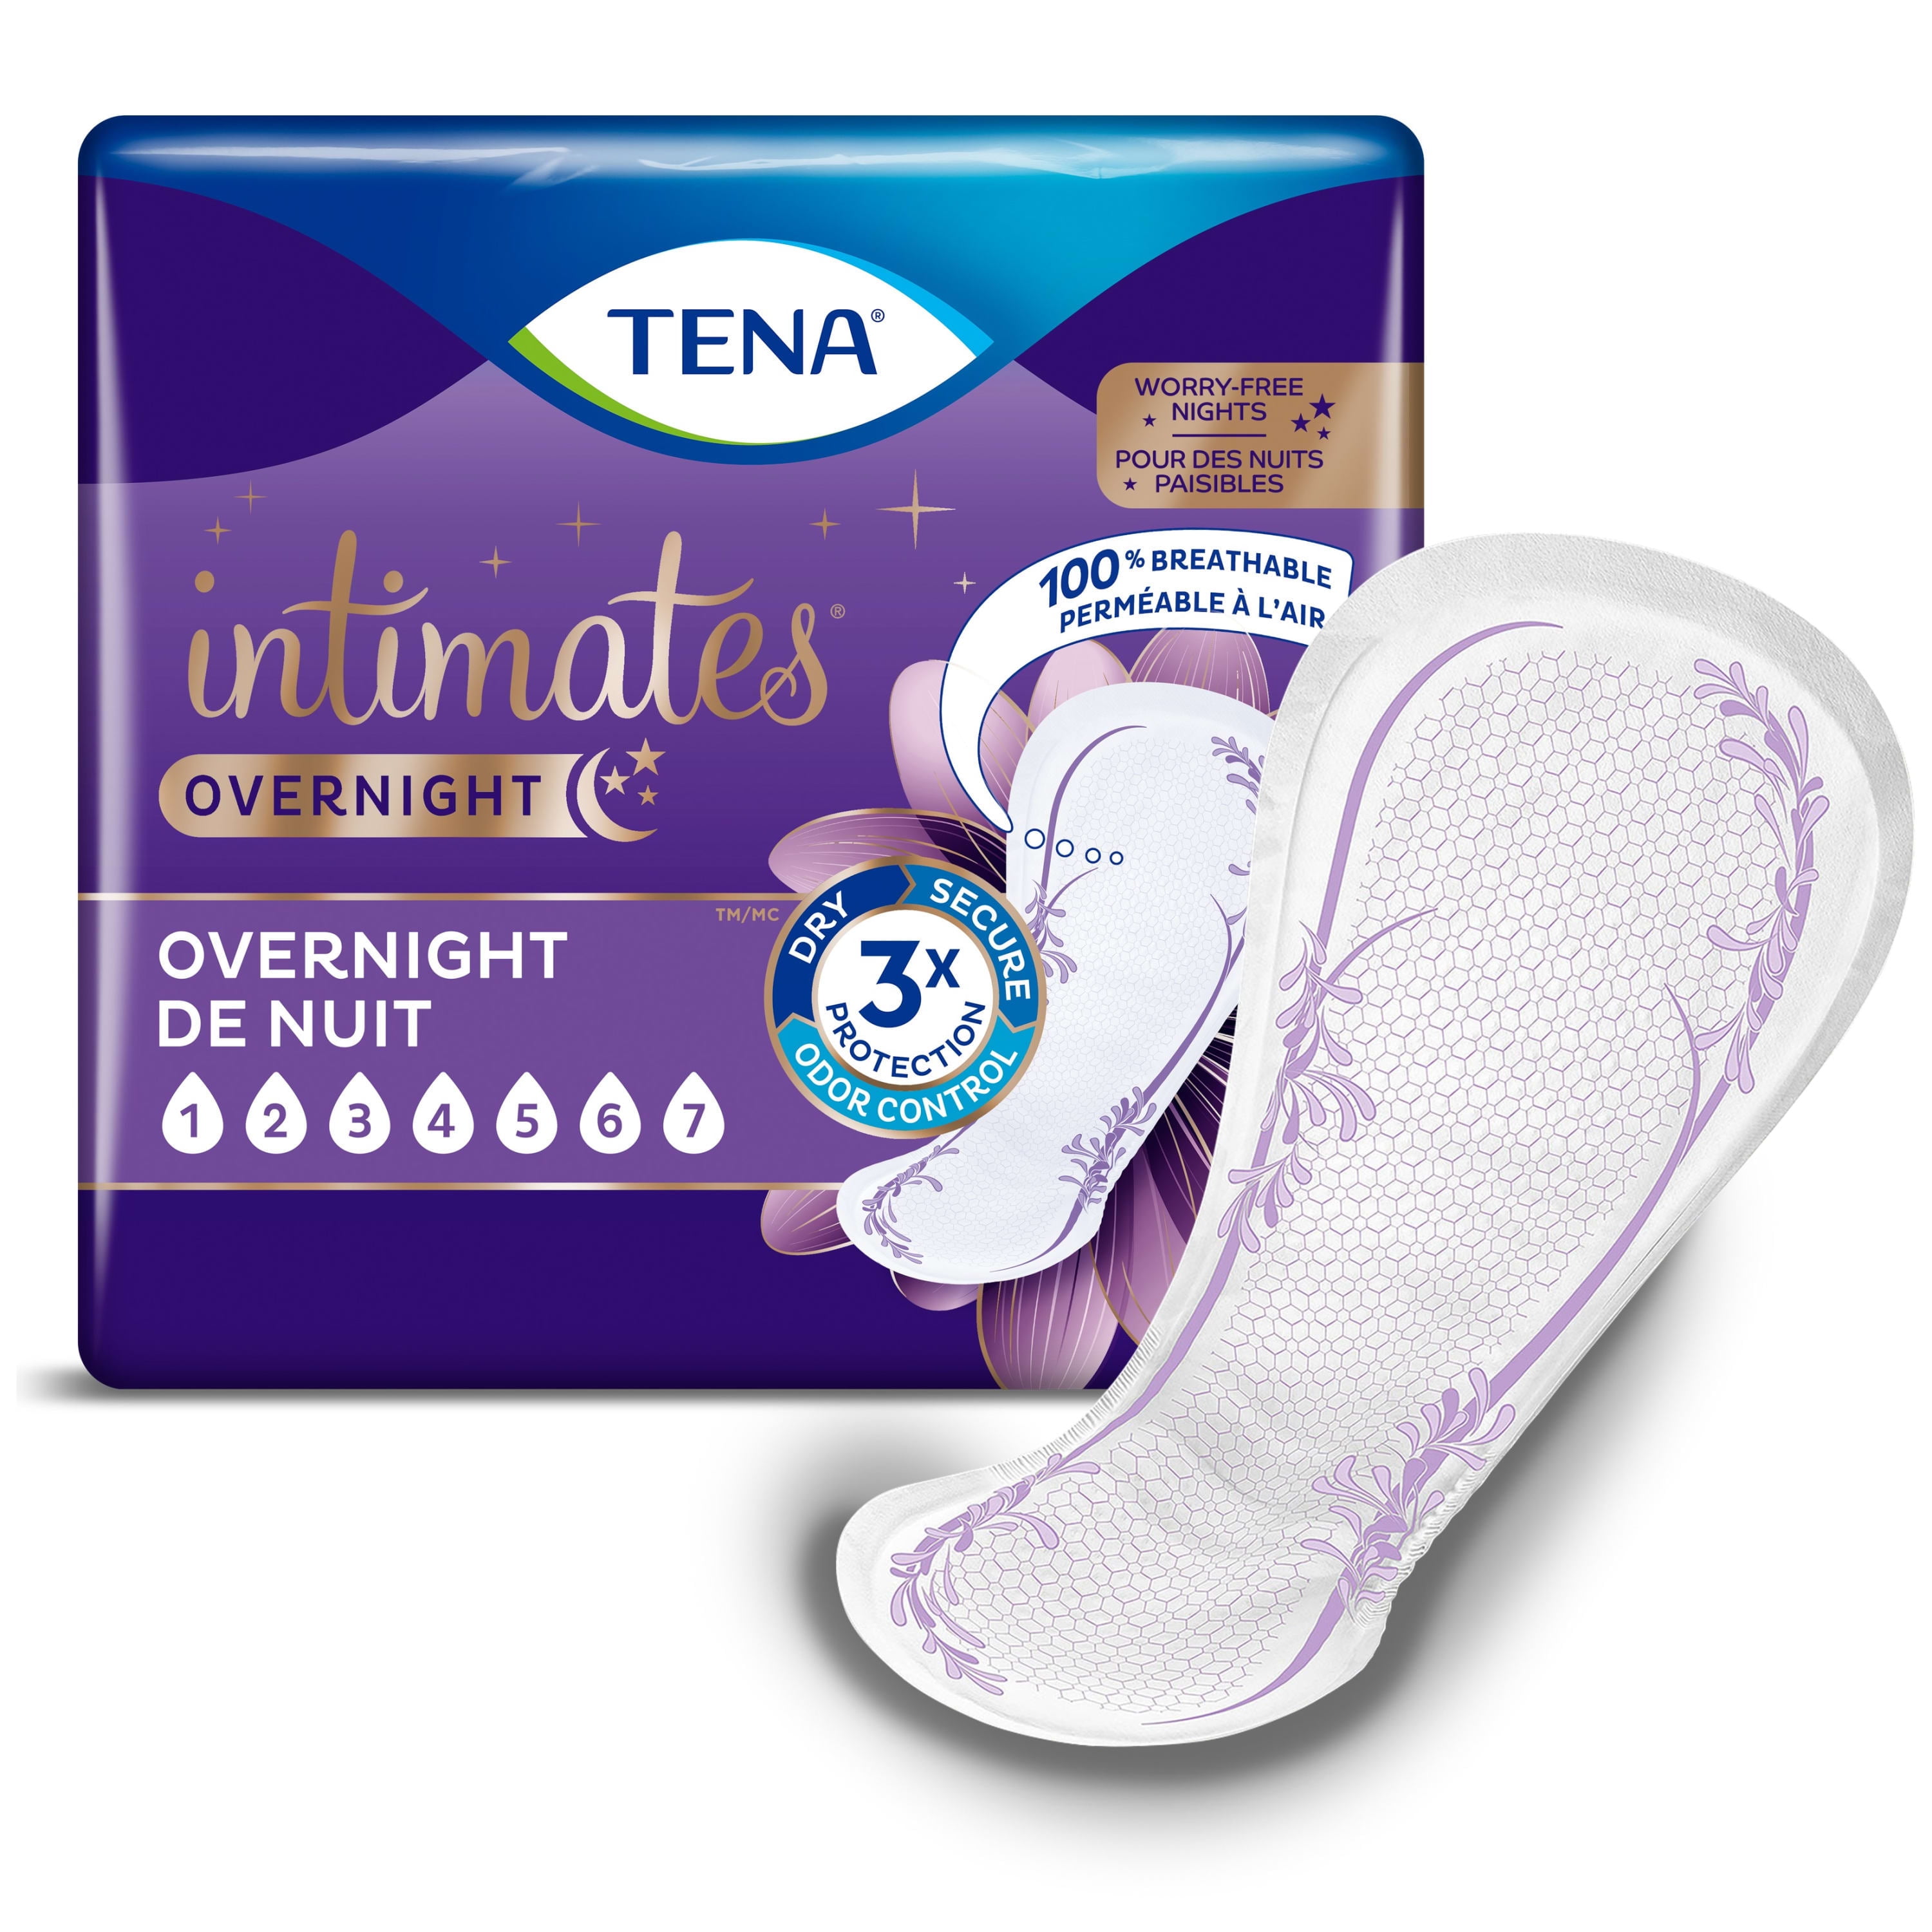 Tena Intimates Extra Coverage Overnight Incontinence Pads For Women, 28 ct  - Baker's